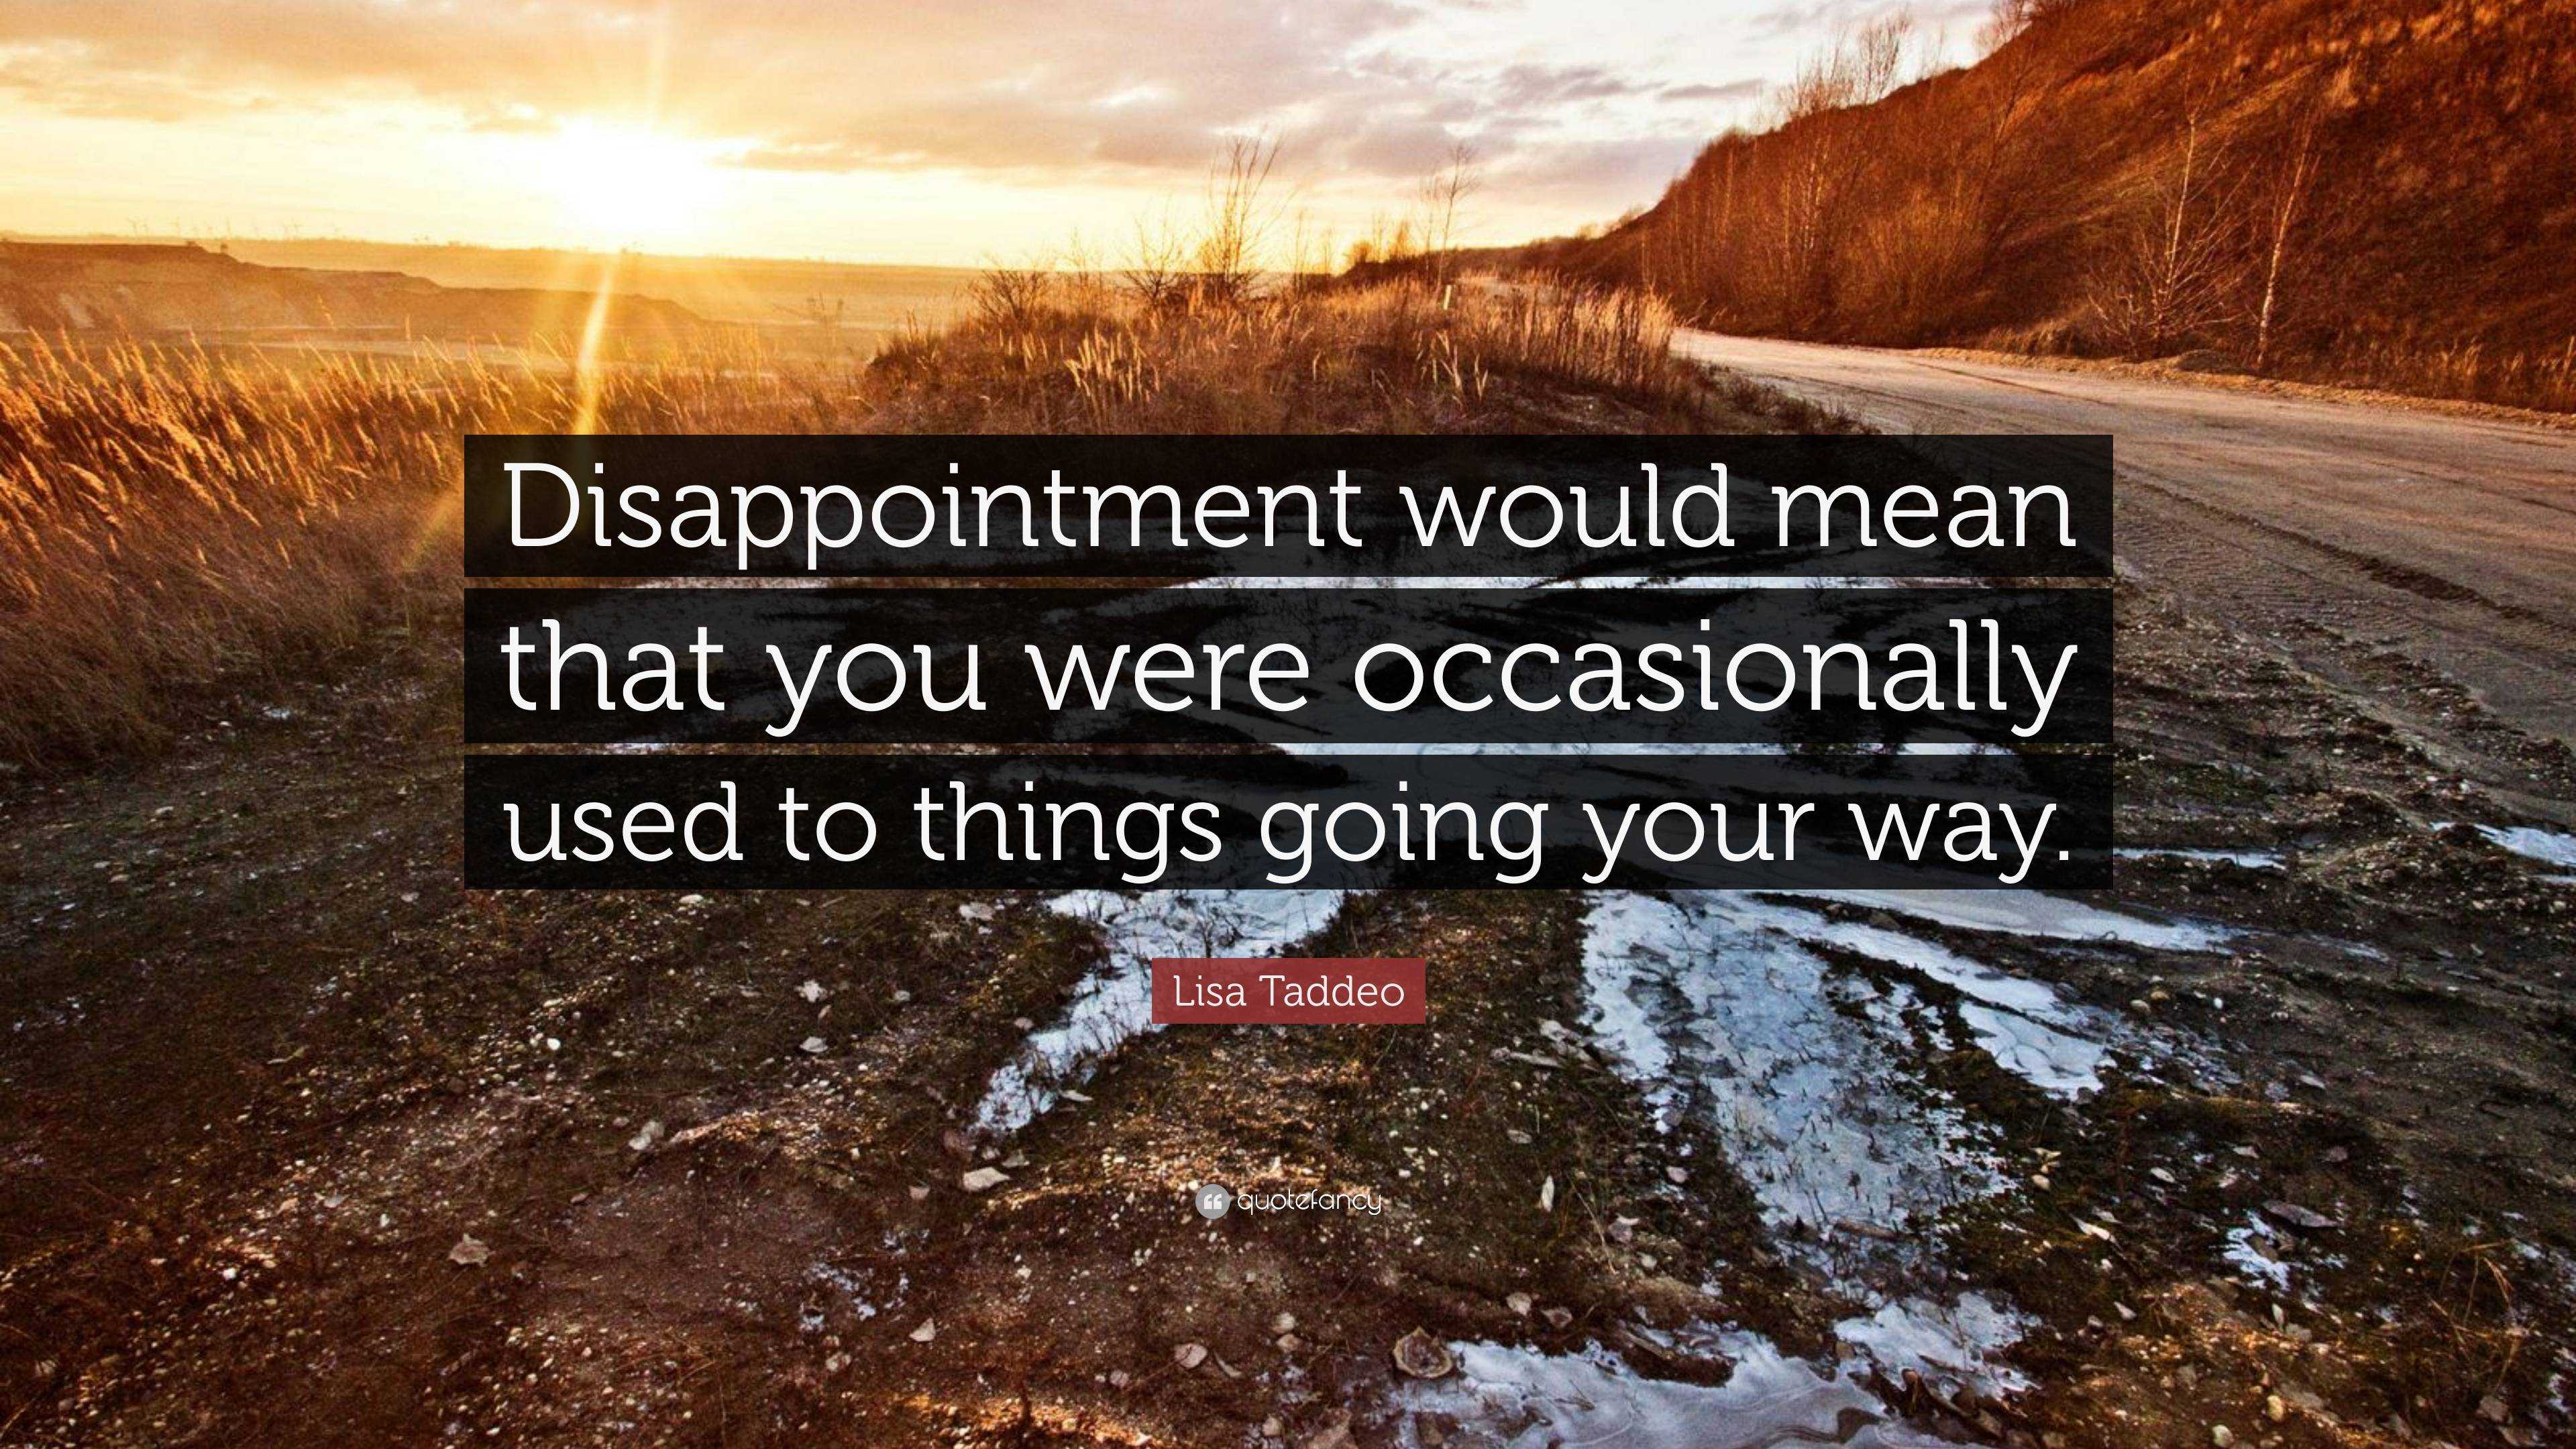 Lisa Taddeo Quote: “Disappointment would mean that you were